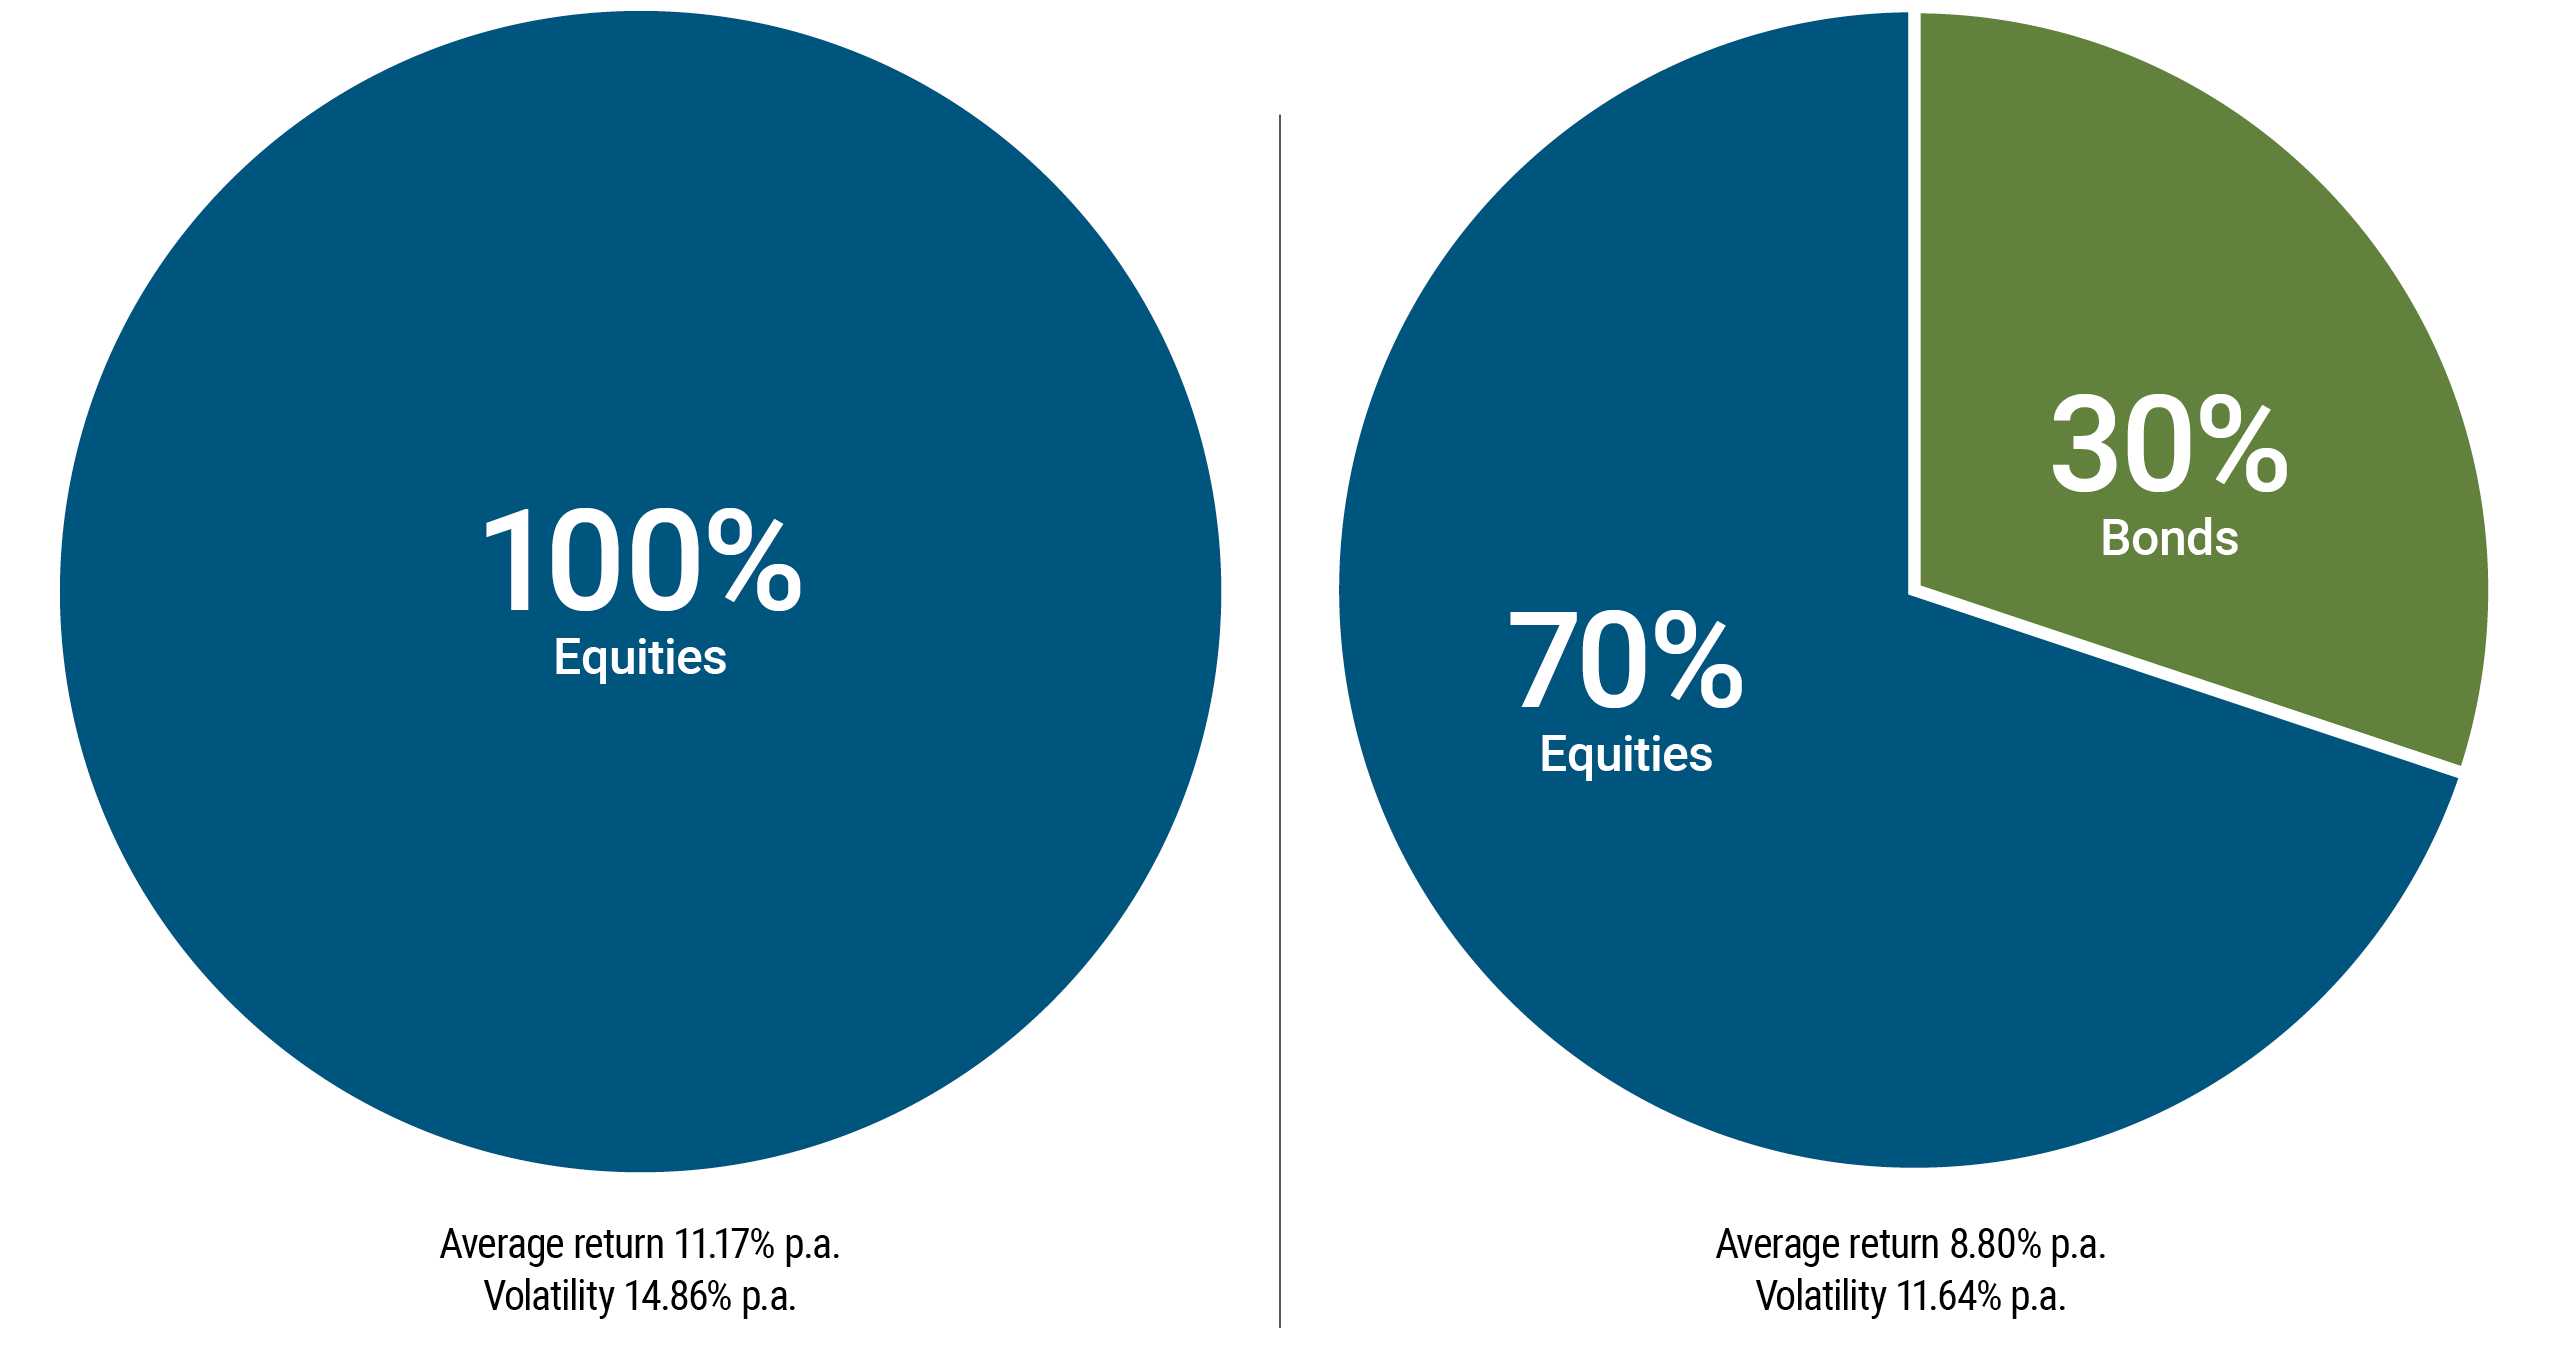 The figure features two pie charts showing the compositions of two different portfolios. On the left, shaded in blue, the pie chart shows an allocation of 100% equities. Underneath the chart, it’s noted that the average return is 11.17% per annum, with volatility over the same period of 14.86%. On the right, a pie chart features a portfolio with an allocation of 70% in equities, in blue, and 30% in bonds, in green. The average annual return is 8.8% with a volatility of 11.64%. 